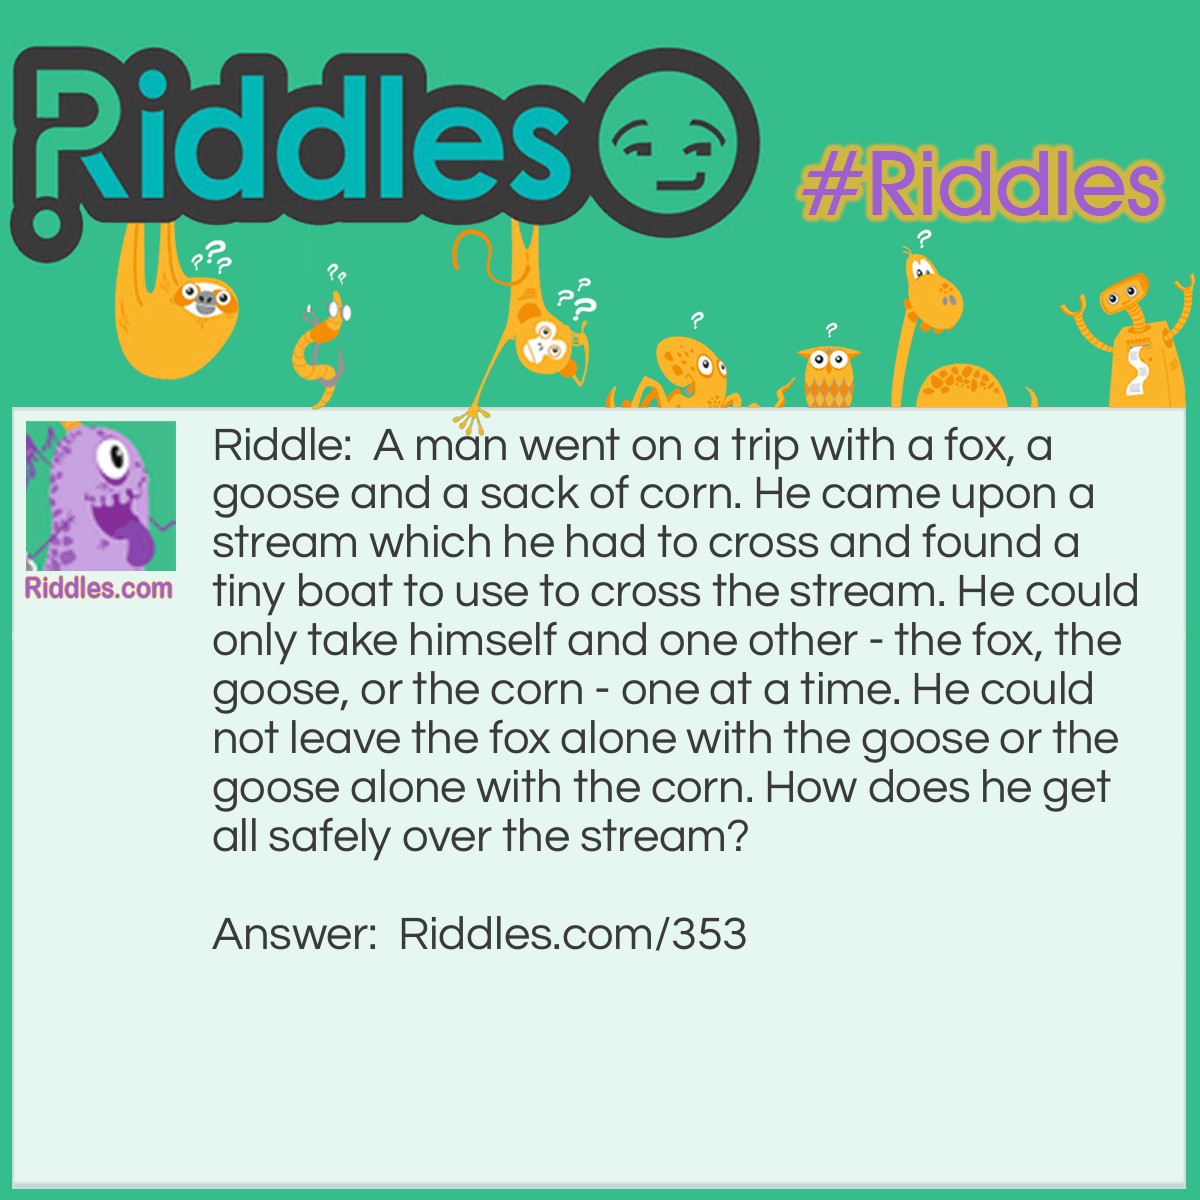 Riddle: A man went on a trip with a fox, a goose, and a sack of corn. He came upon a stream that he had to cross and found a tiny boat to use to cross the stream. He could only take himself and one other - the fox, the goose, or the corn - one at a time. He could not leave the fox alone with the goose or the goose with the corn. How does he get all safely over the stream? Answer: Take the goose over first and come back. Then take the fox over and bring the goose back. Now take the corn over and come back alone to get the goose. Take the goose over and the job is done!